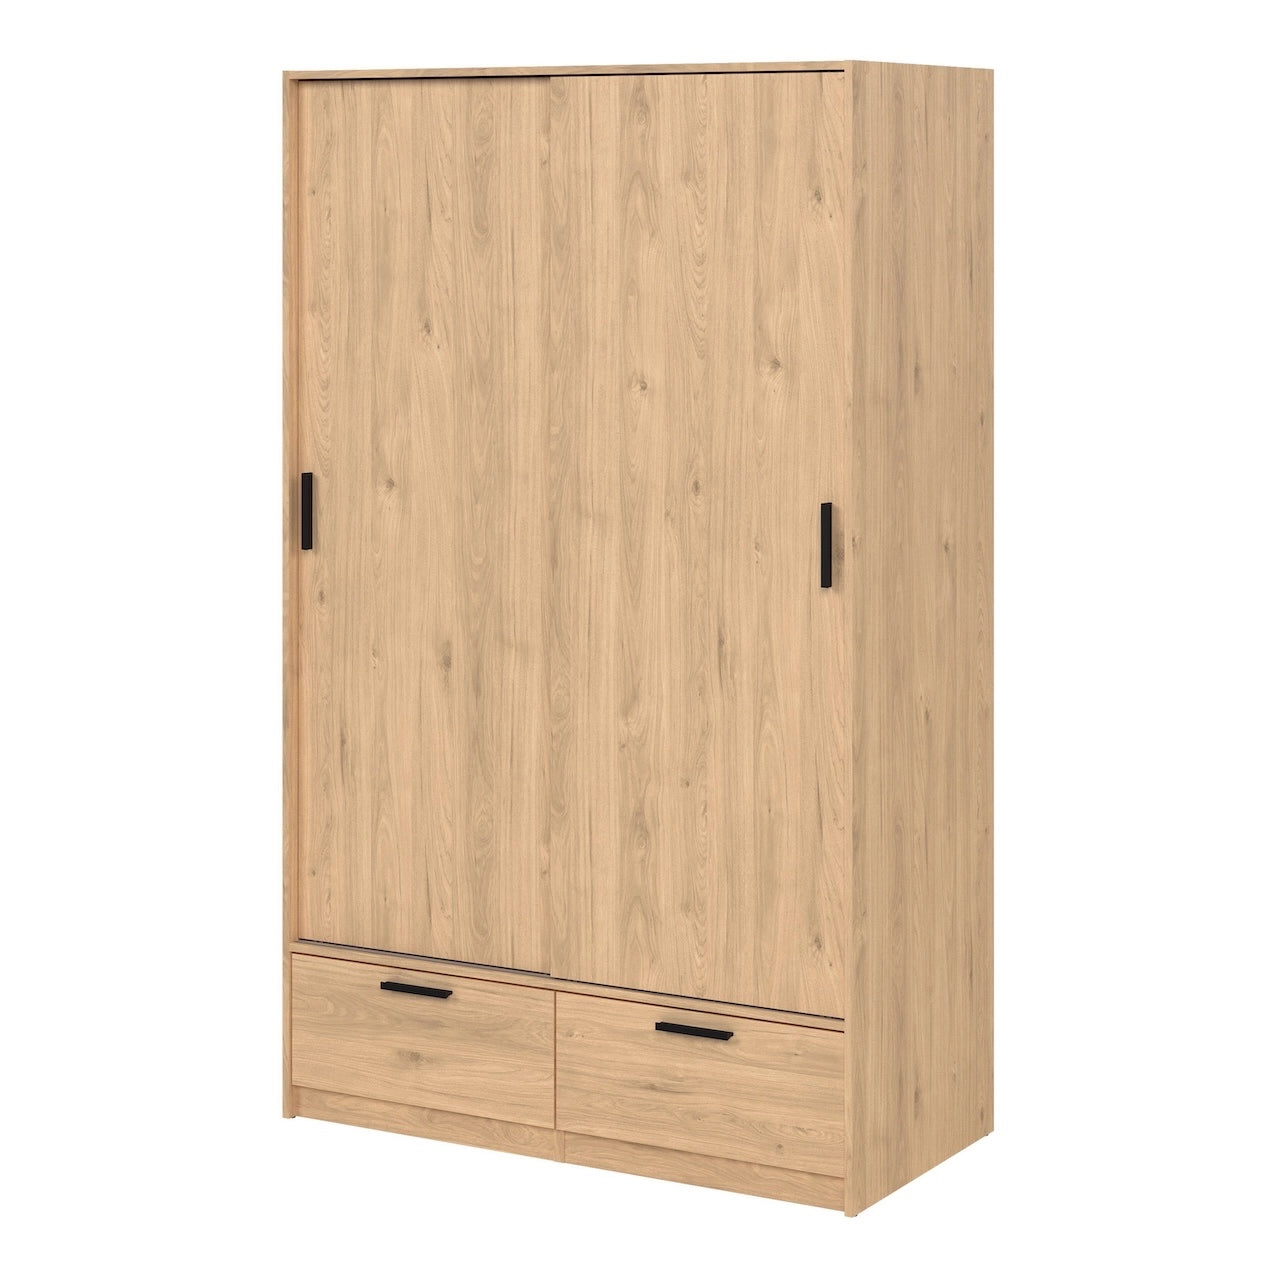 Furniture To Go Line Wardrobe with 2 Doors + 2 Drawers in Jackson Hickory Oak